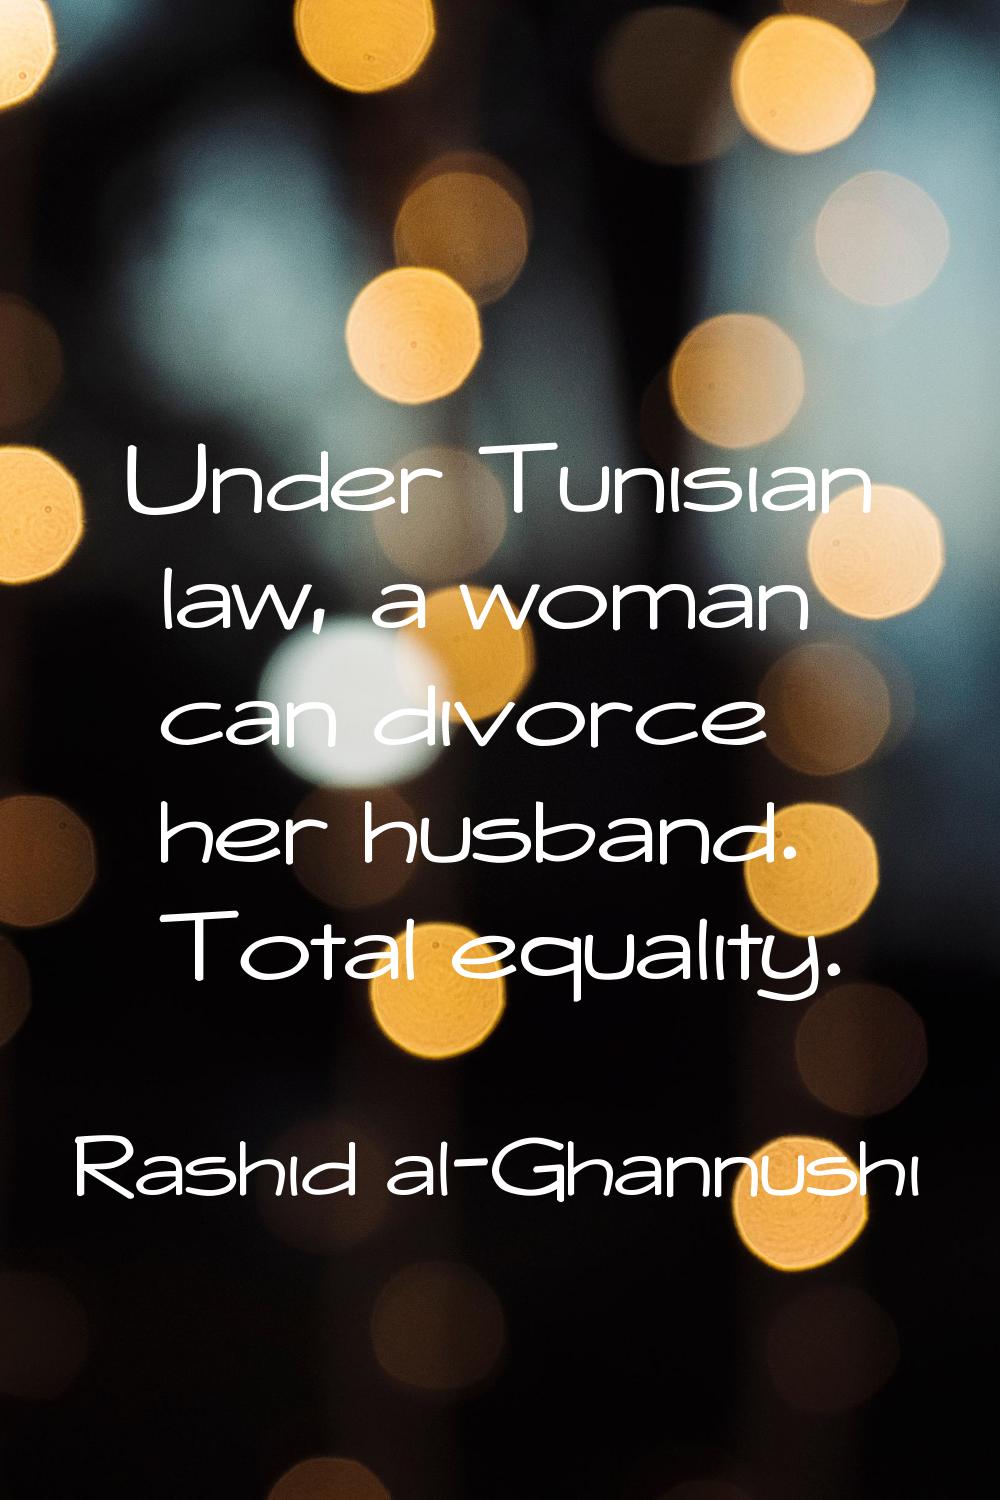 Under Tunisian law, a woman can divorce her husband. Total equality.